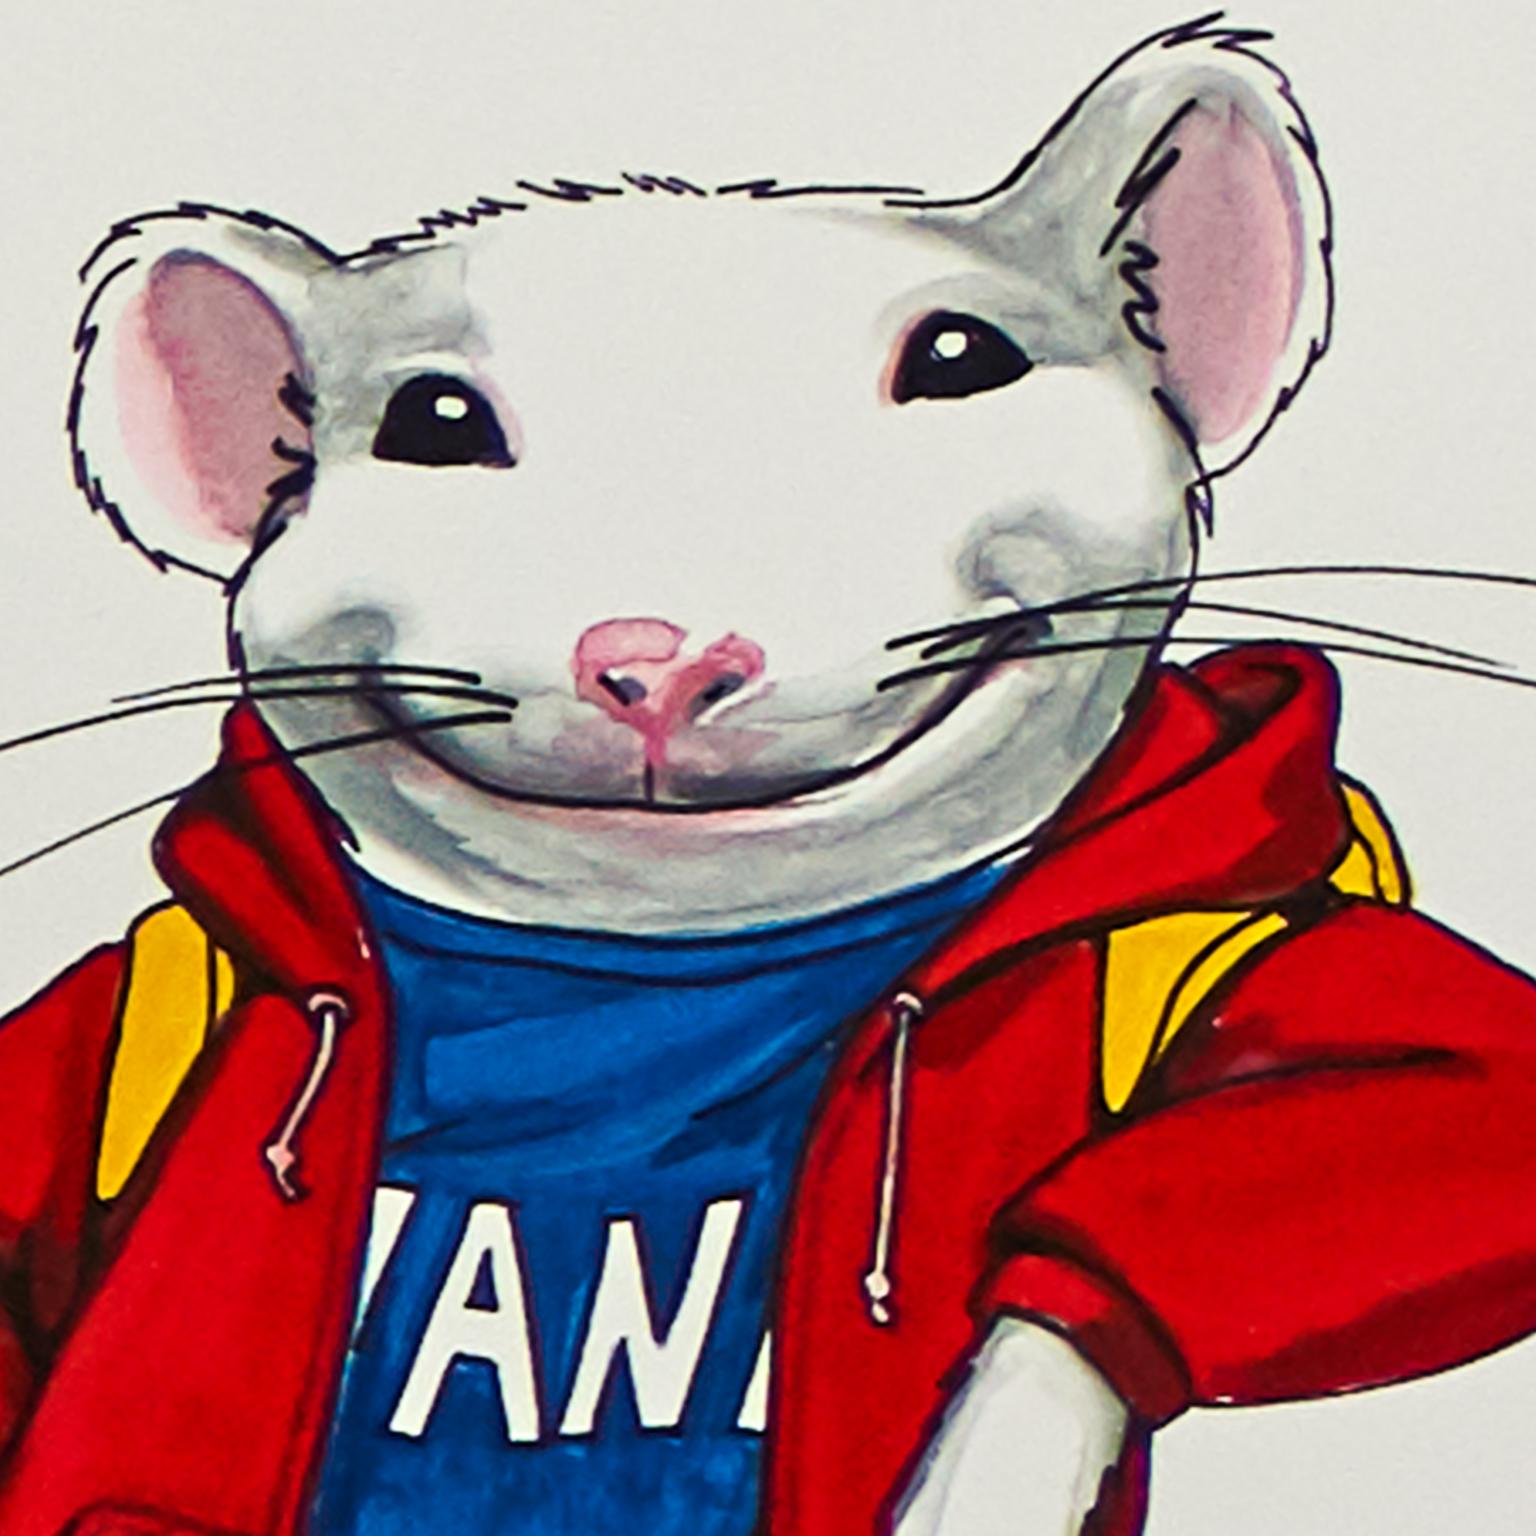 This original concept drawing for Stuart Little 2 has been personally signed by celebrated illustrator, Felipe Sanchez. It shows Stuart Little dressed in a red hoodie with yellow trimming, a blue t-shirt, yellow cargo pants and red & white